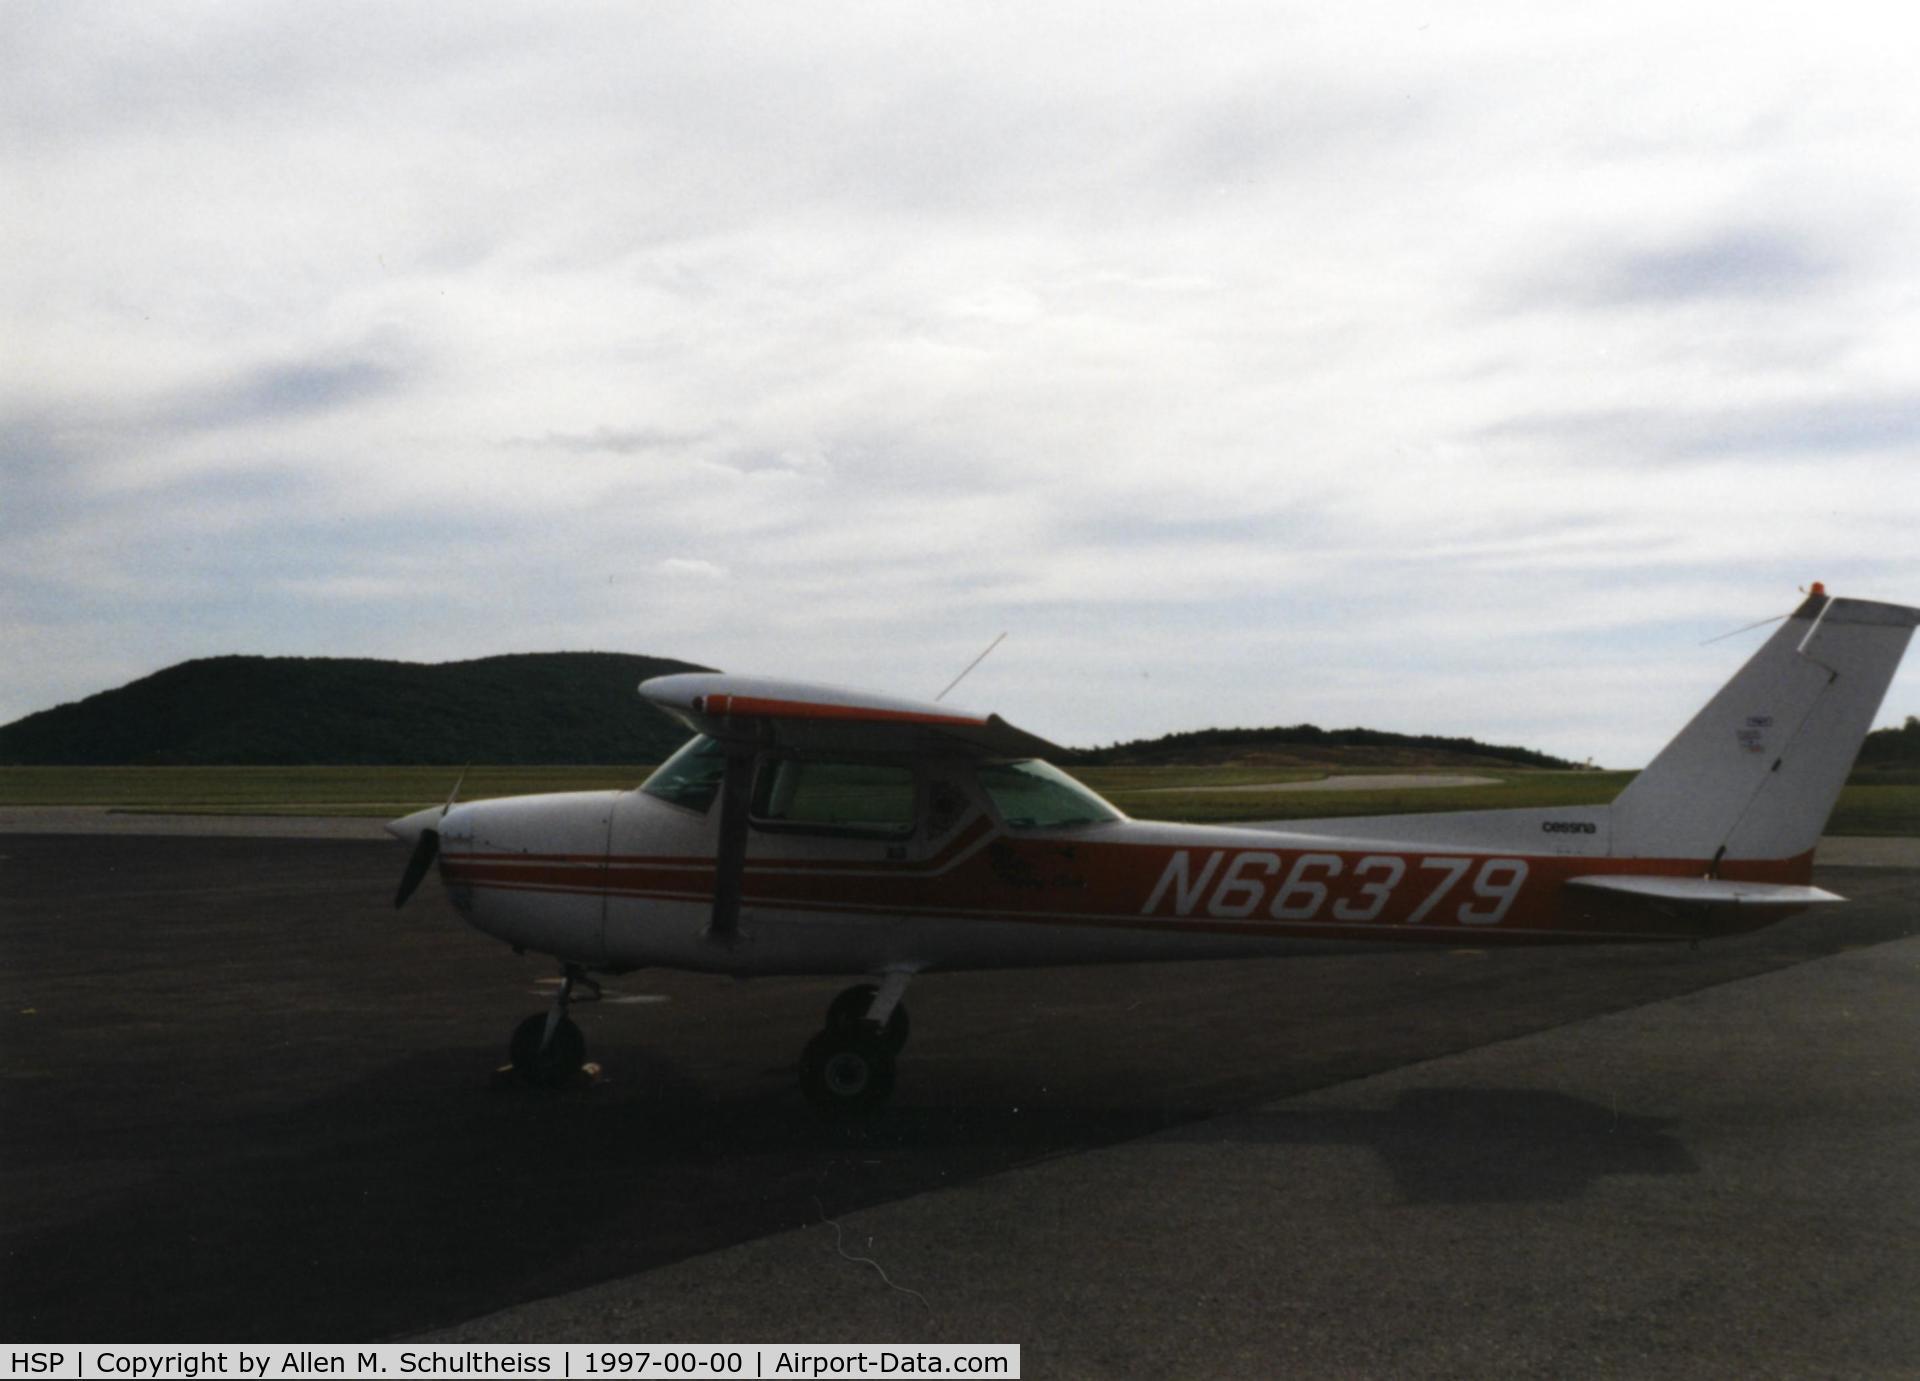 Ingalls Field Airport (HSP) - Looking over N66379 at the approach to 07